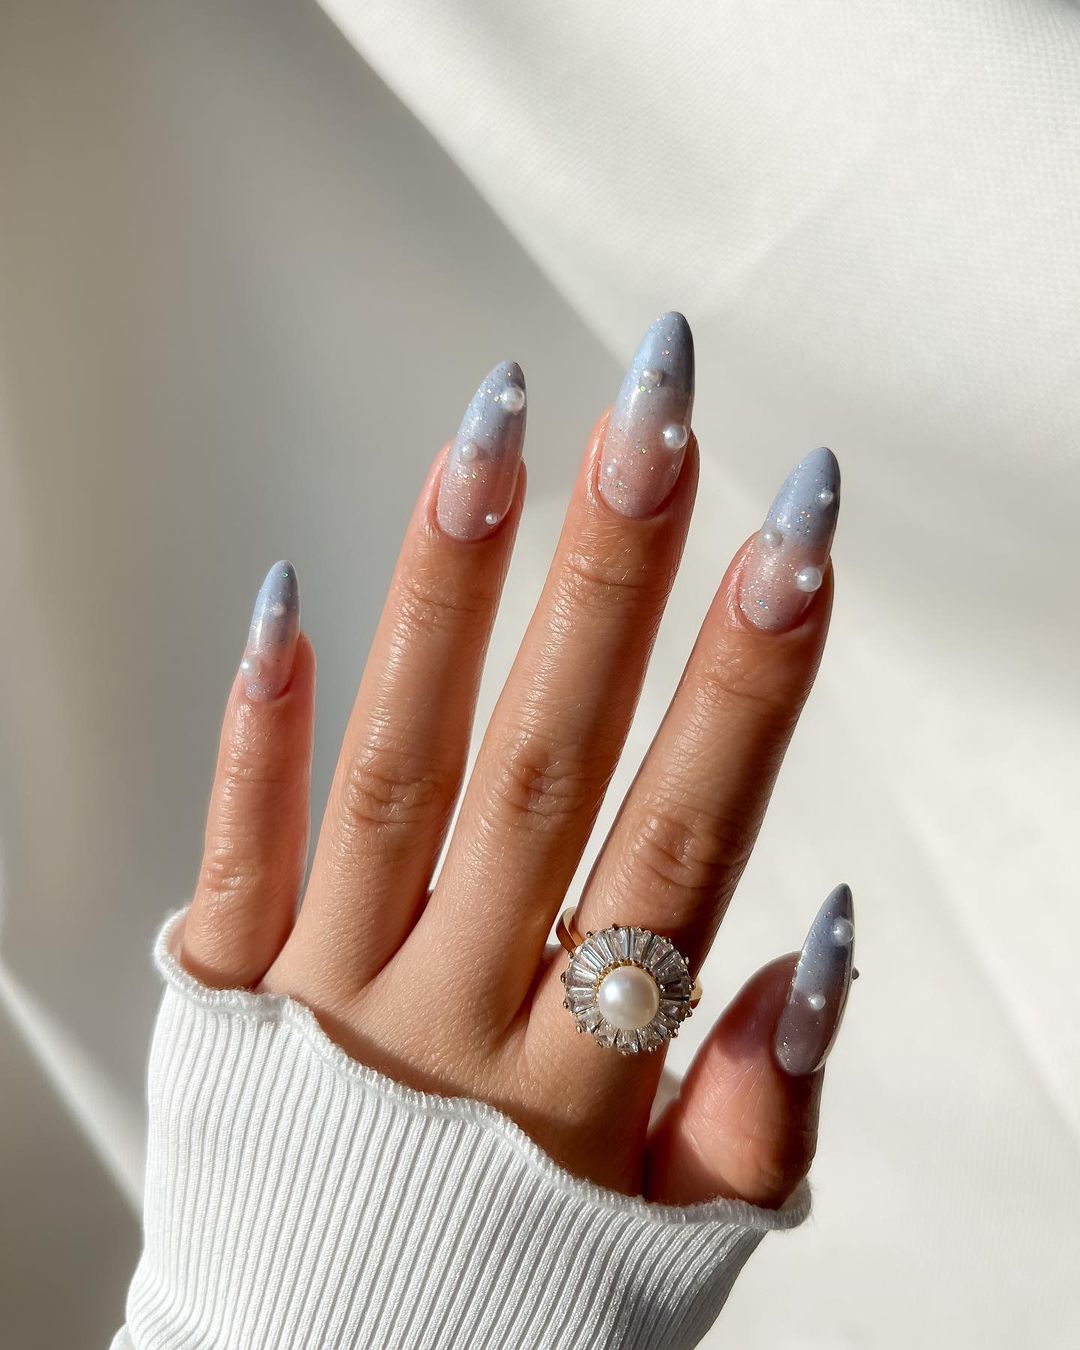 Frosty Fingertips: 18 Dazzling Nail Designs to Embrace Winter Chic